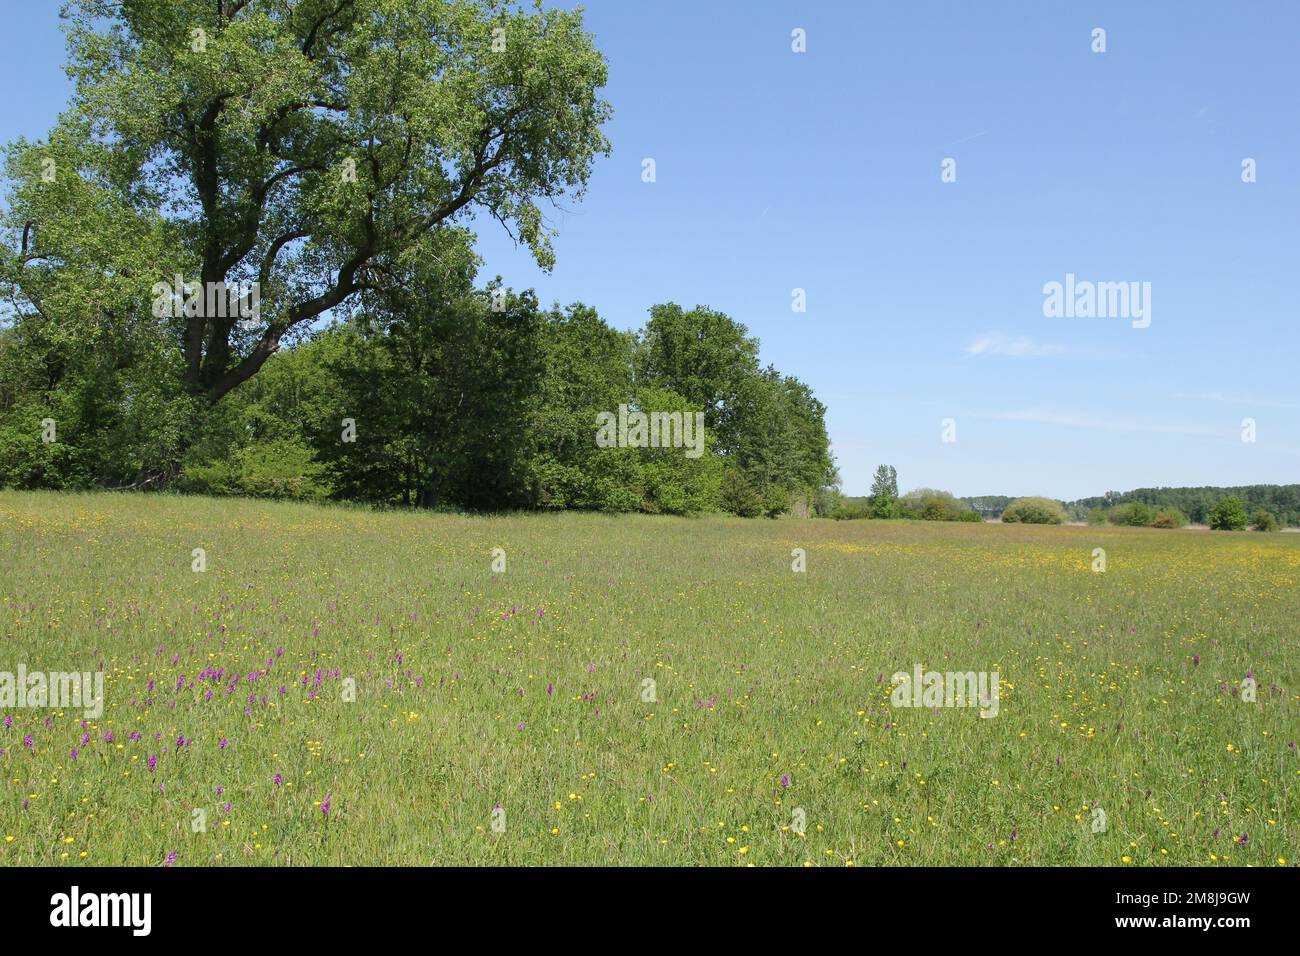 beautiful grassland with different wild flowers and orchids and green trees at the left side and a blue sky in the background Stock Photo